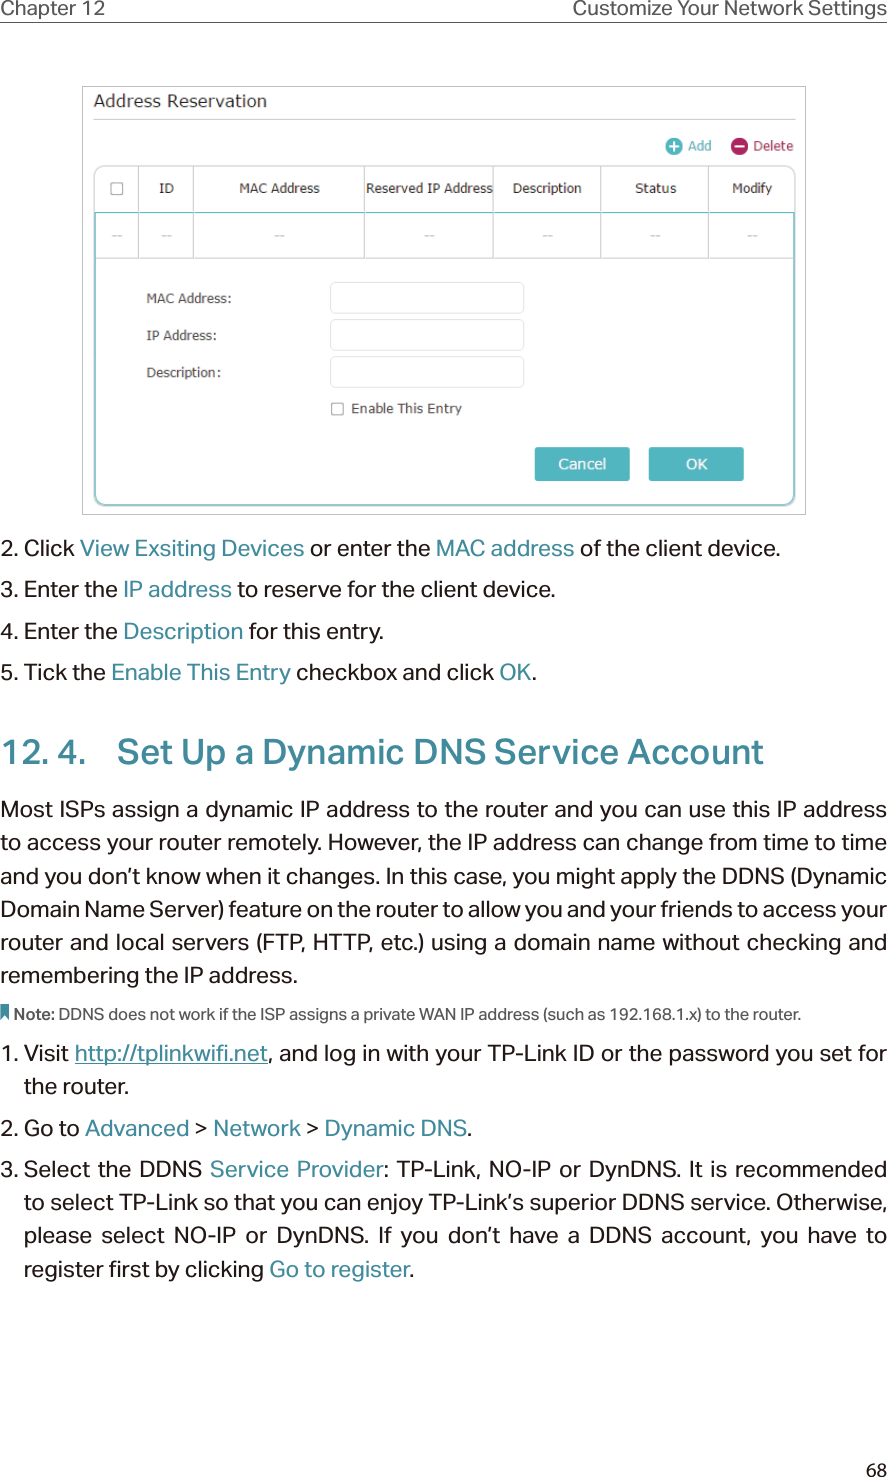 68Chapter 12 Customize Your Network Settings2. Click View Exsiting Devices or enter the MAC address of the client device.3. Enter the IP address to reserve for the client device.4. Enter the Description for this entry.5. Tick the Enable This Entry checkbox and click OK. 12. 4.  Set Up a Dynamic DNS Service AccountMost ISPs assign a dynamic IP address to the router and you can use this IP address to access your router remotely. However, the IP address can change from time to time and you don’t know when it changes. In this case, you might apply the DDNS (Dynamic Domain Name Server) feature on the router to allow you and your friends to access your router and local servers (FTP, HTTP, etc.) using a domain name without checking and remembering the IP address. Note: DDNS does not work if the ISP assigns a private WAN IP address (such as 192.168.1.x) to the router. 1. Visit http://tplinkwifi.net, and log in with your TP-Link ID or the password you set for the router.2. Go to Advanced &gt; Network &gt; Dynamic DNS.3. Select  the  DDNS  Service Provider: TP-Link, NO-IP or DynDNS. It is recommended to select TP-Link so that you can enjoy TP-Link’s superior DDNS service. Otherwise, please select NO-IP or DynDNS. If you don’t have a DDNS account, you have to  register first by clicking Go to register.